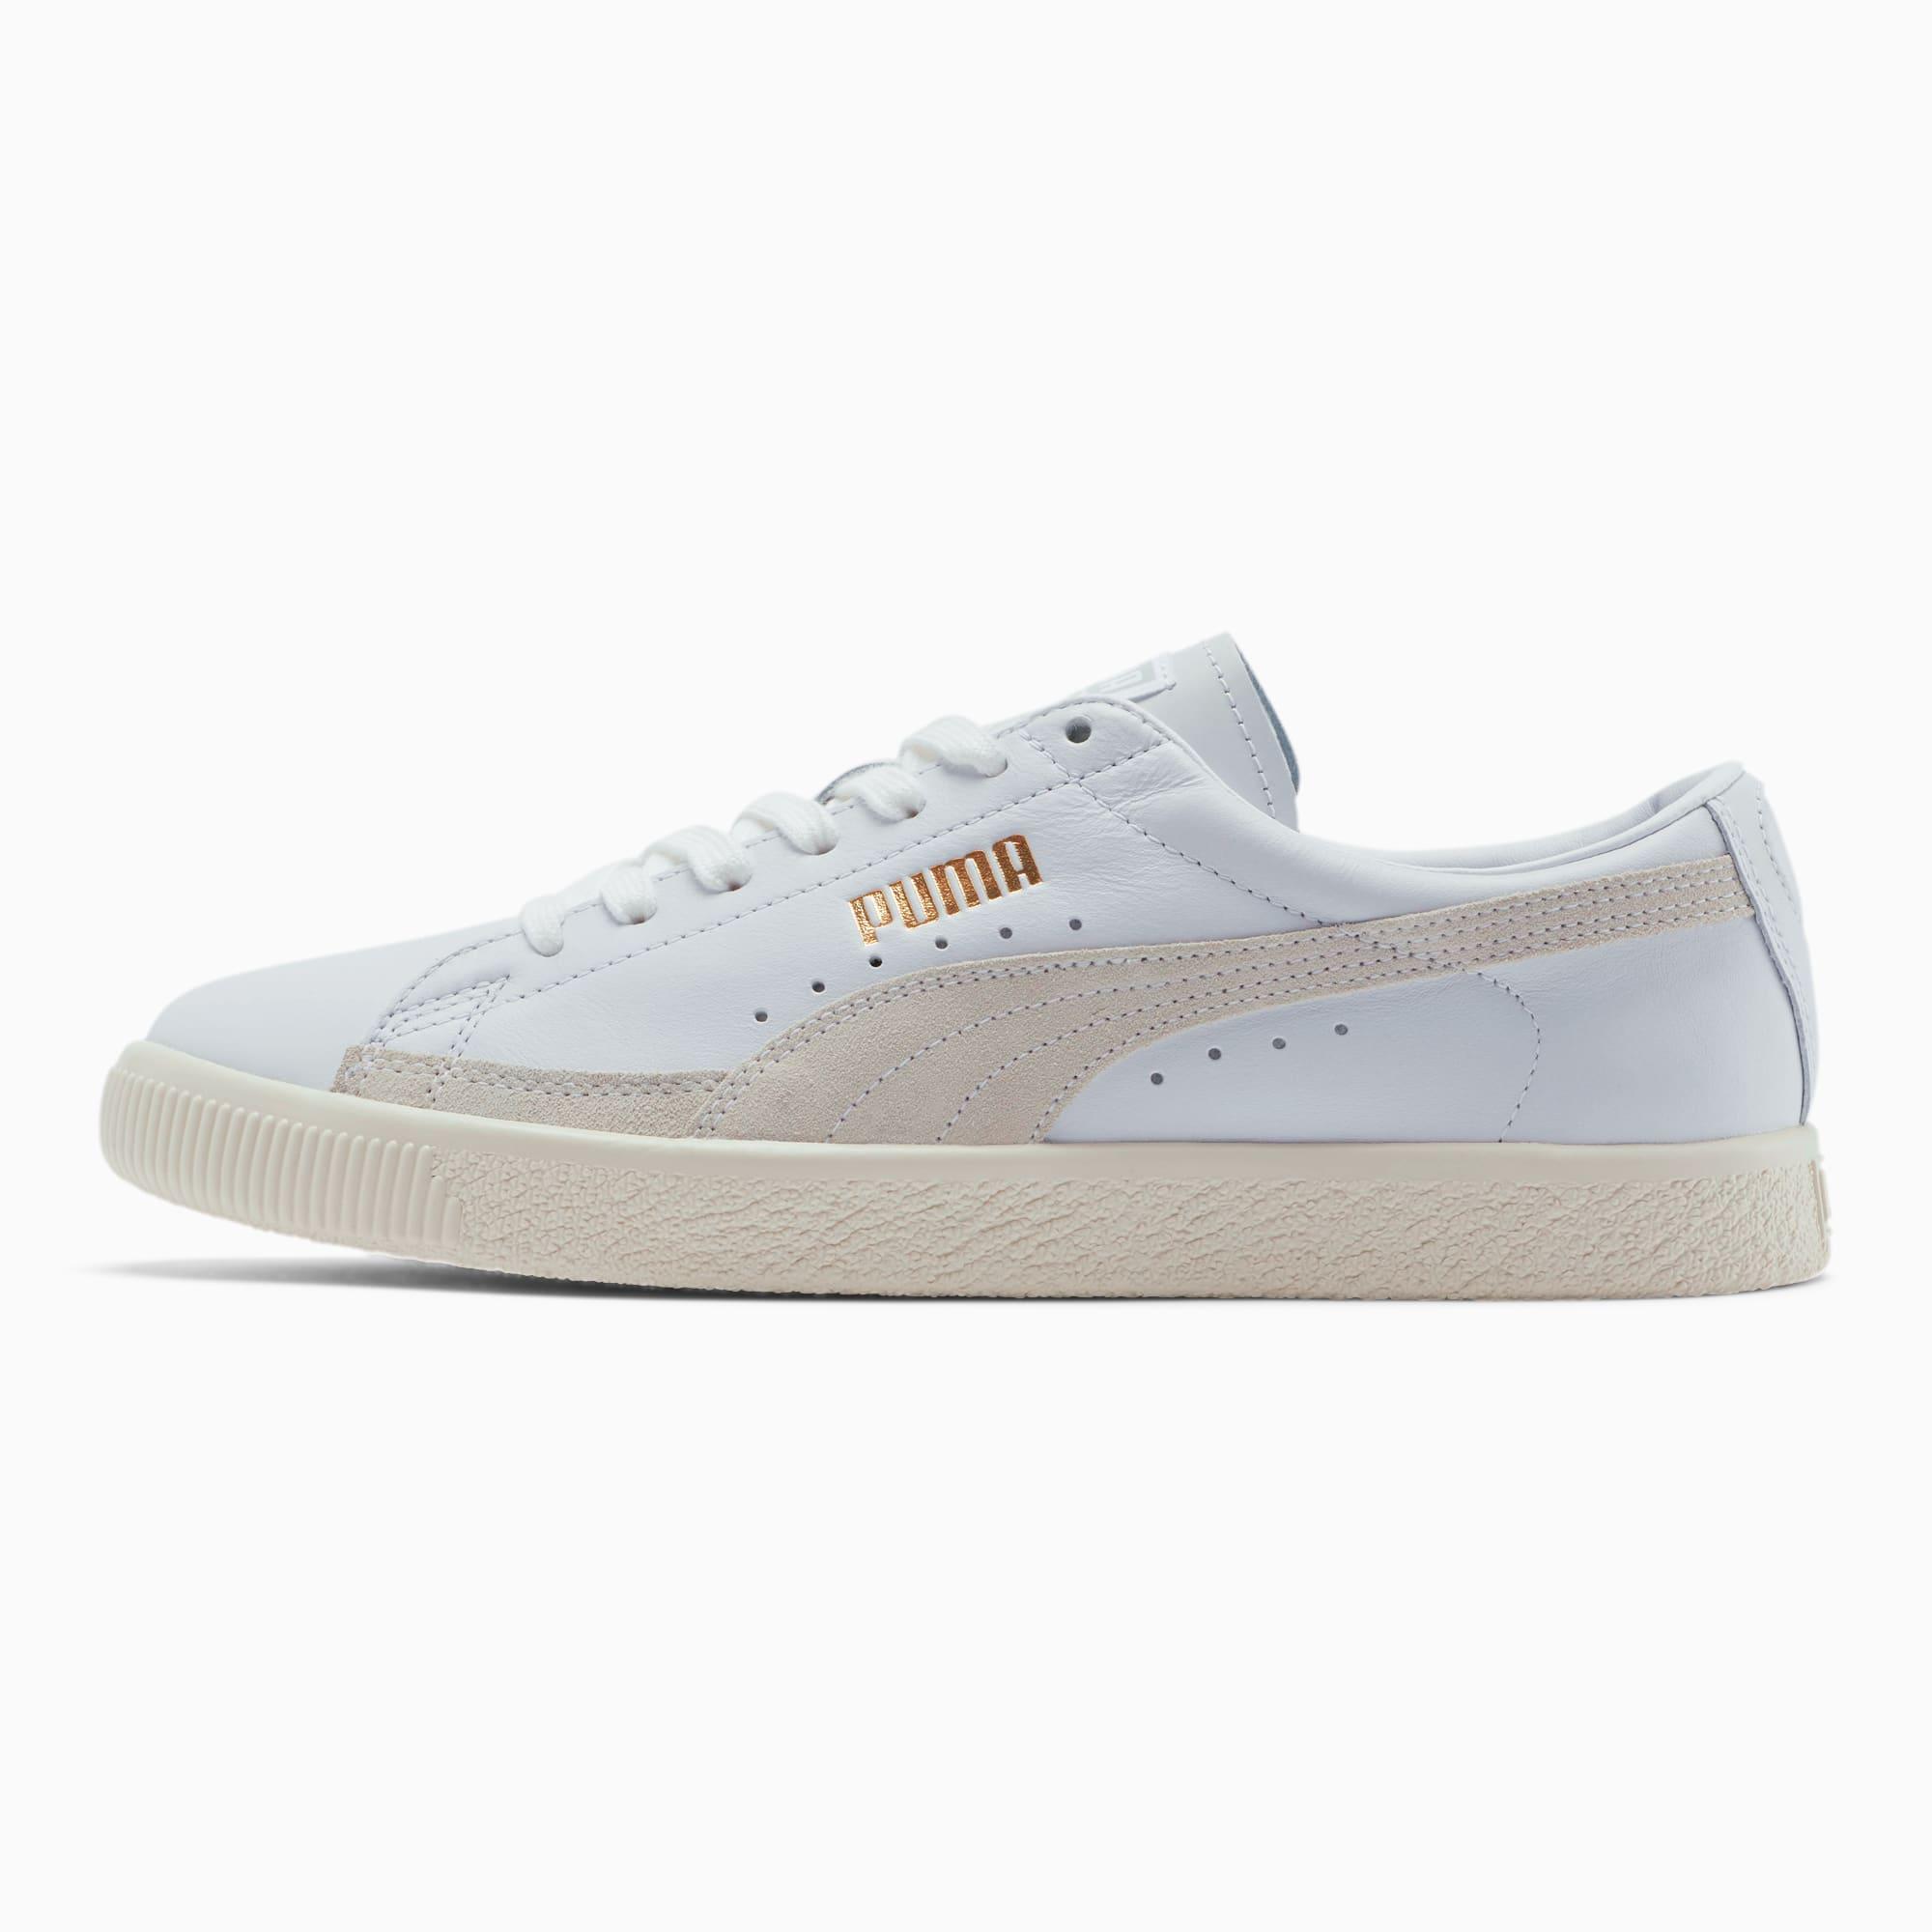 PUMA Suede Basket 90680 Lux Sneakers in White for Men - Lyst